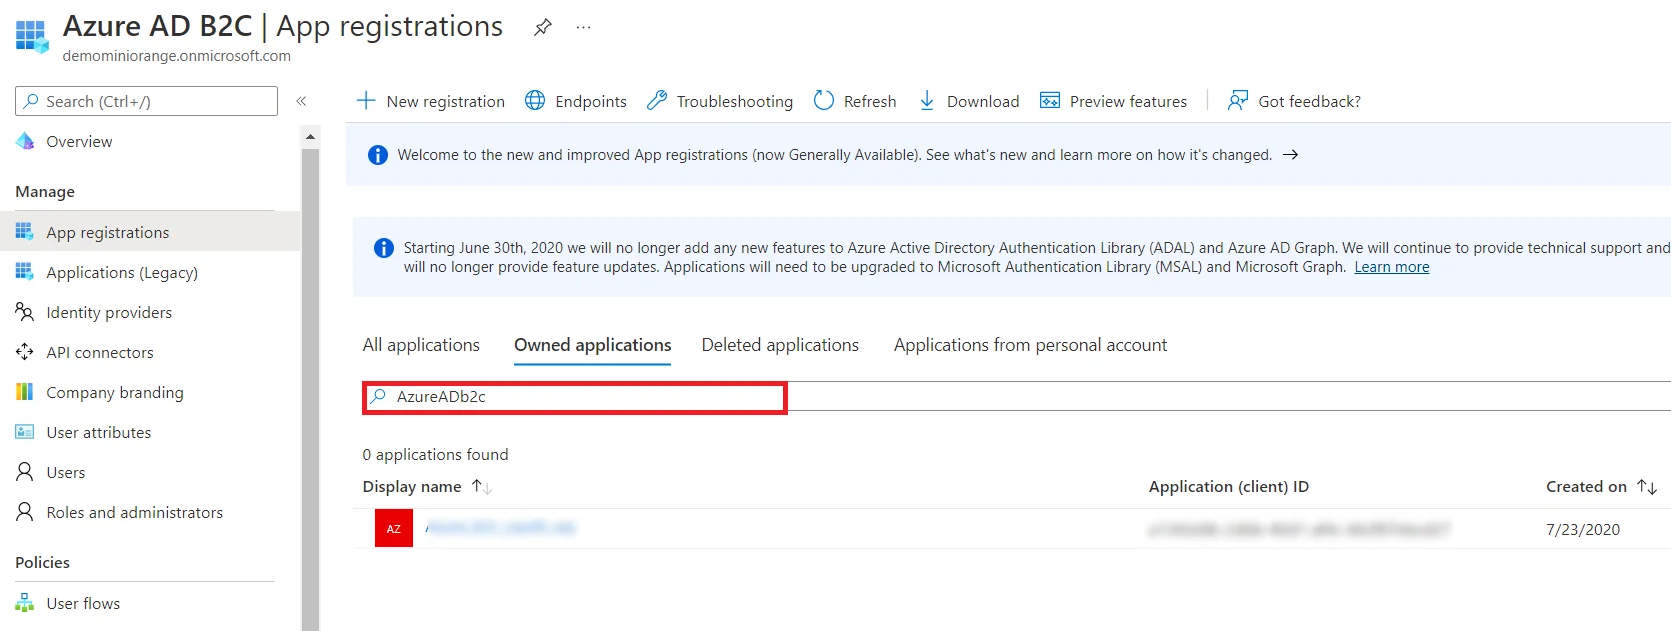 Umbraco OAuth/OIDC Single Sign-On (SSO) using AzureAD B2C as IDP (OAuth Provider) - Applications option